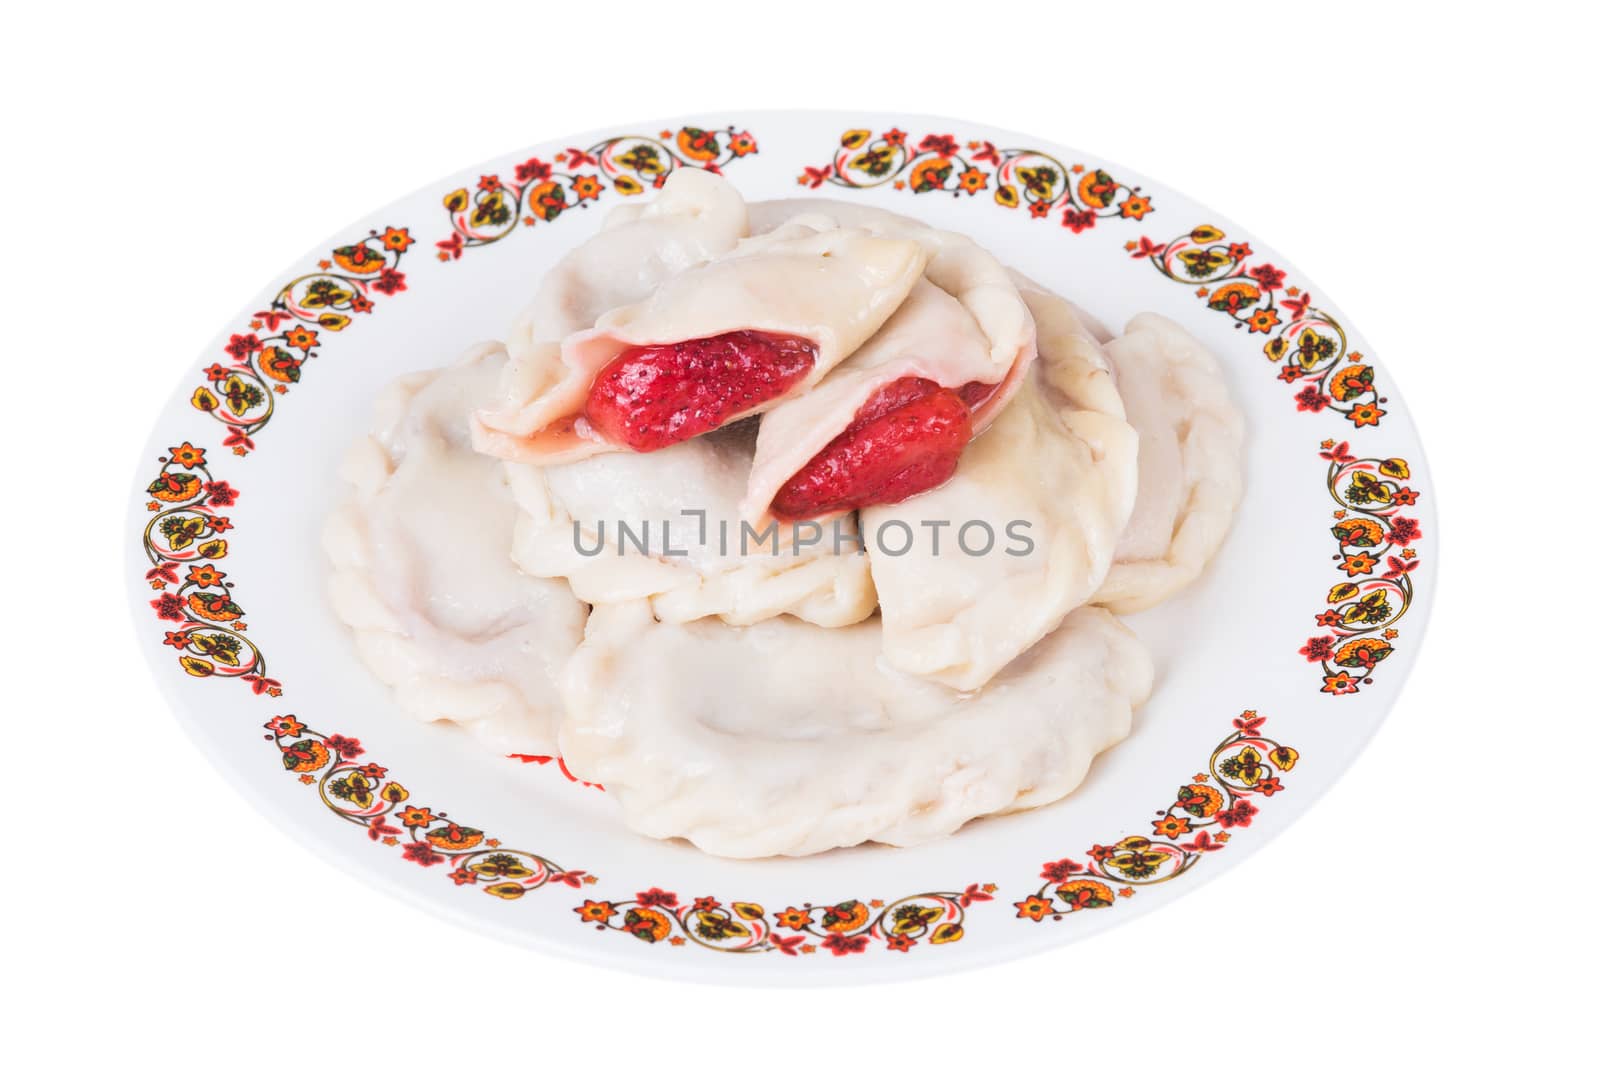 Ukrainian dumplings with strawberries on plate on white background, isolated